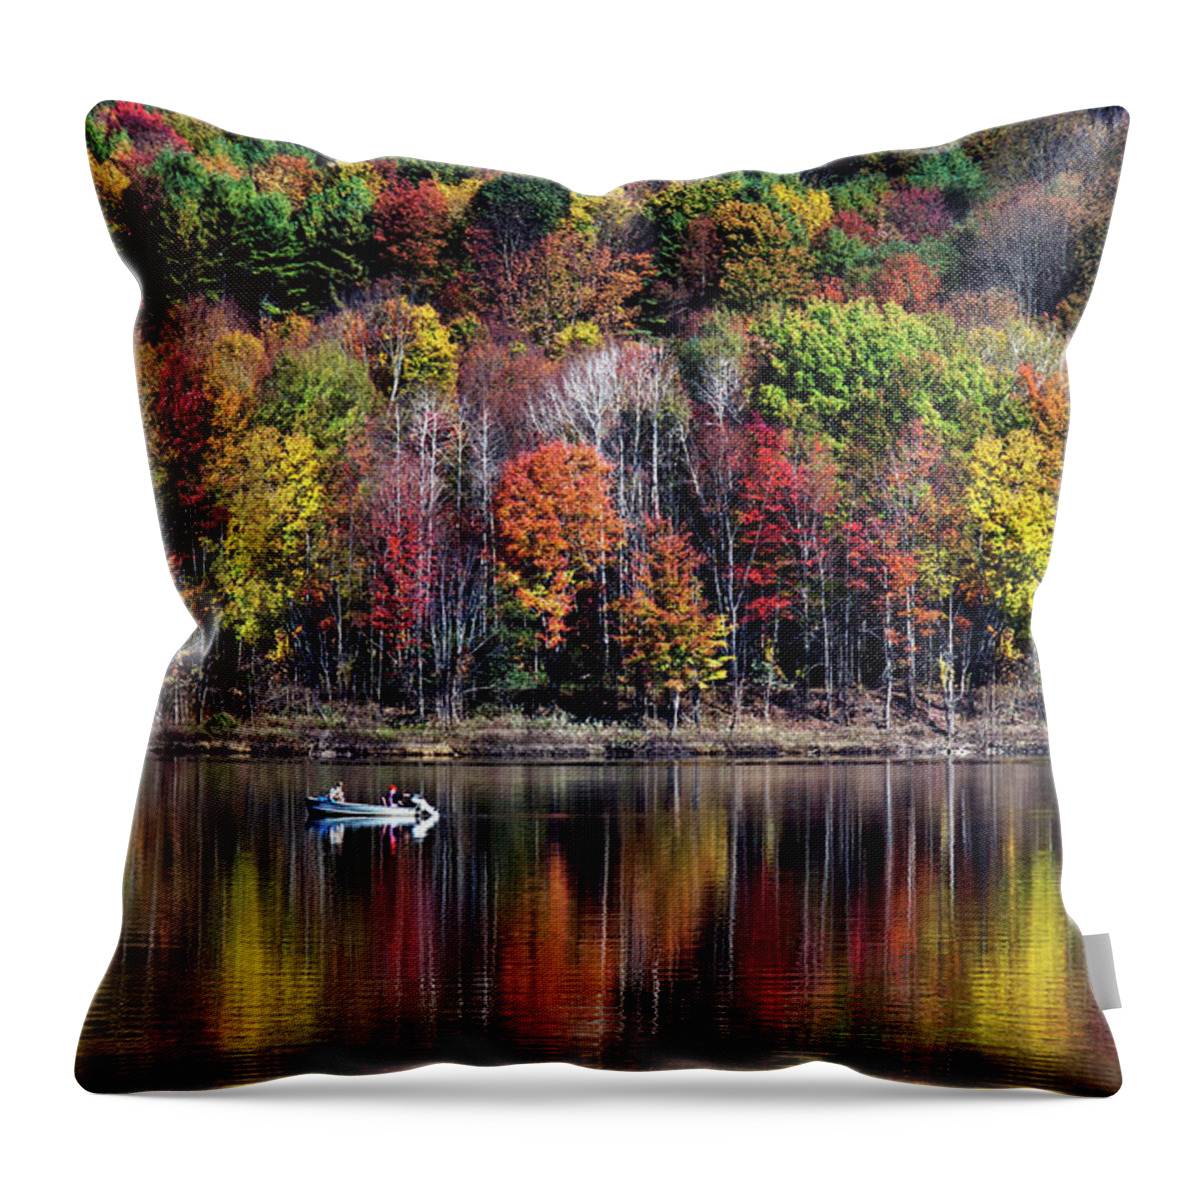 Fall Throw Pillow featuring the photograph Vanishing Autumn Reflection Landscape by Christina Rollo